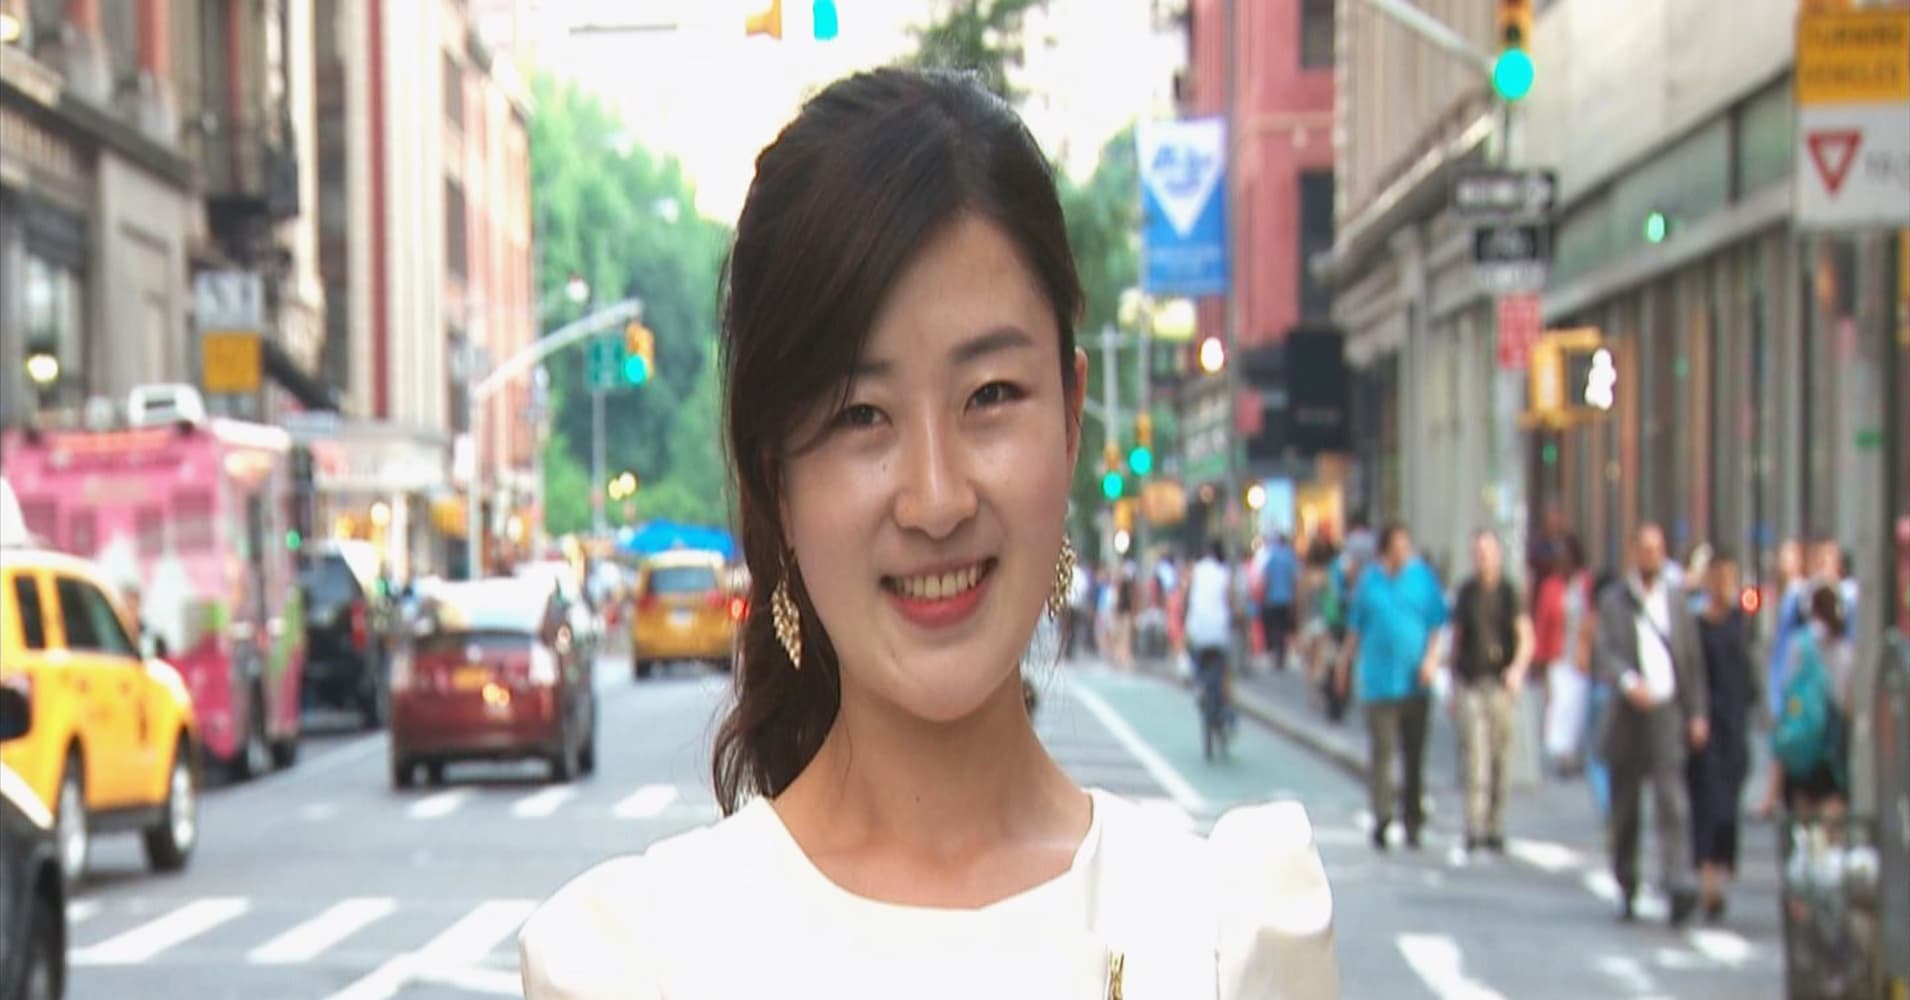 In 2010, Joo Yang defected from North Korea, where she learned about the outside world through radio reports.